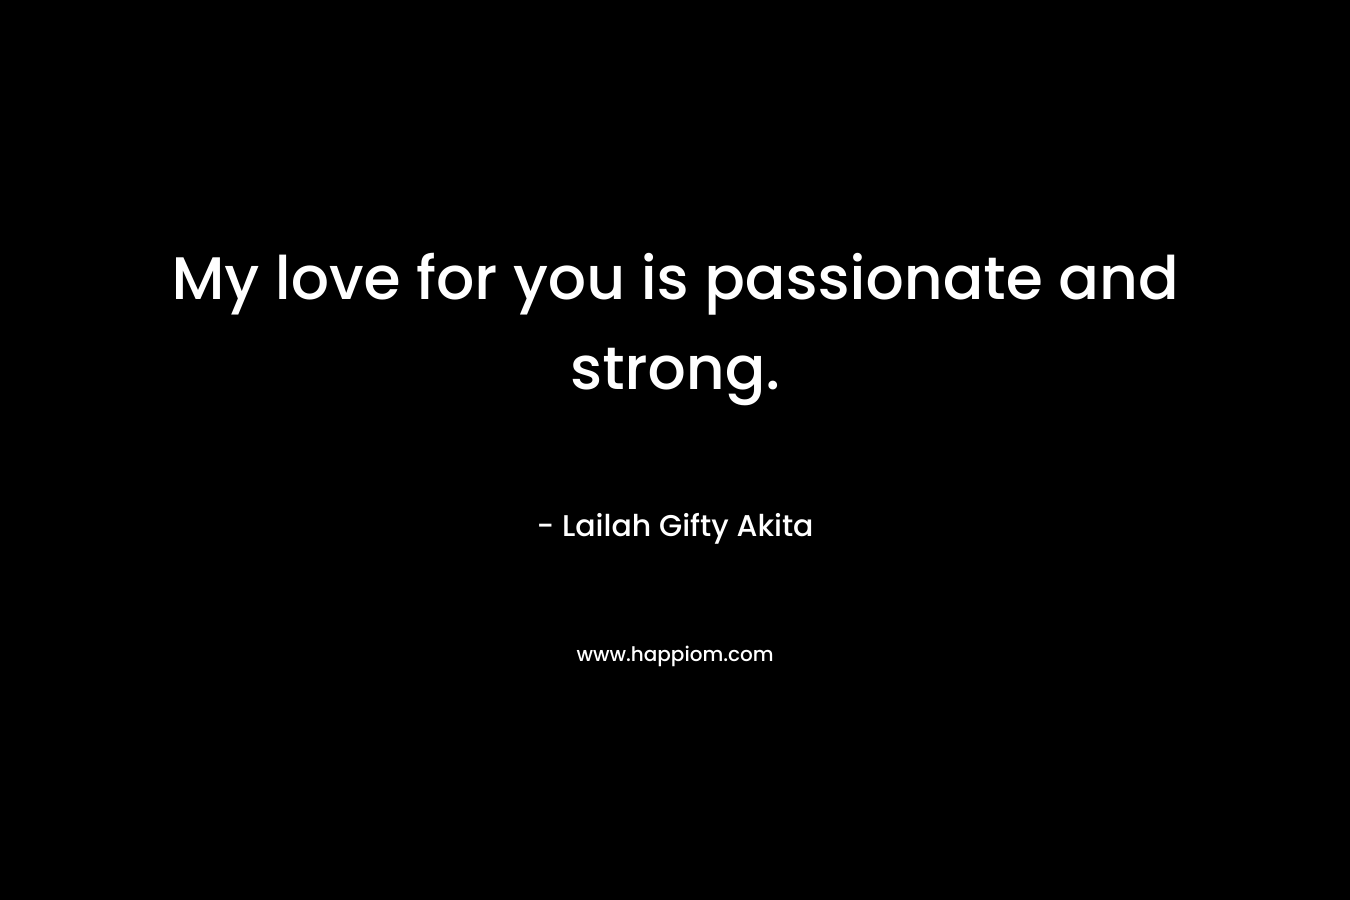 My love for you is passionate and strong.